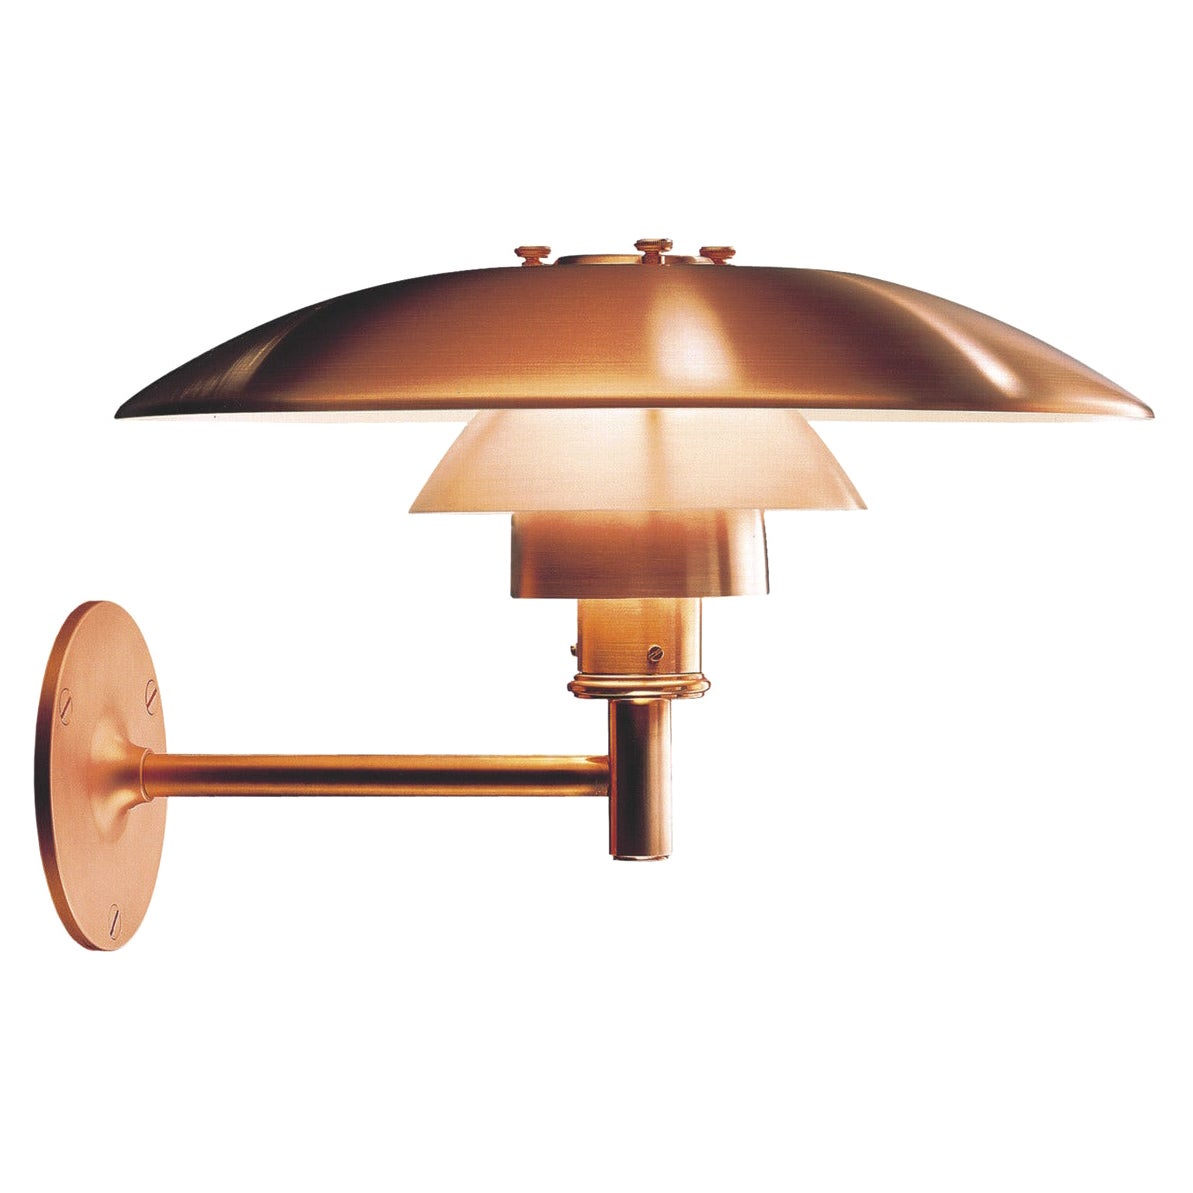 Large Poul Henningsen 'PH Wall' Brown Patinated Outdoor Lamp for Louis Poulsen For Sale 8